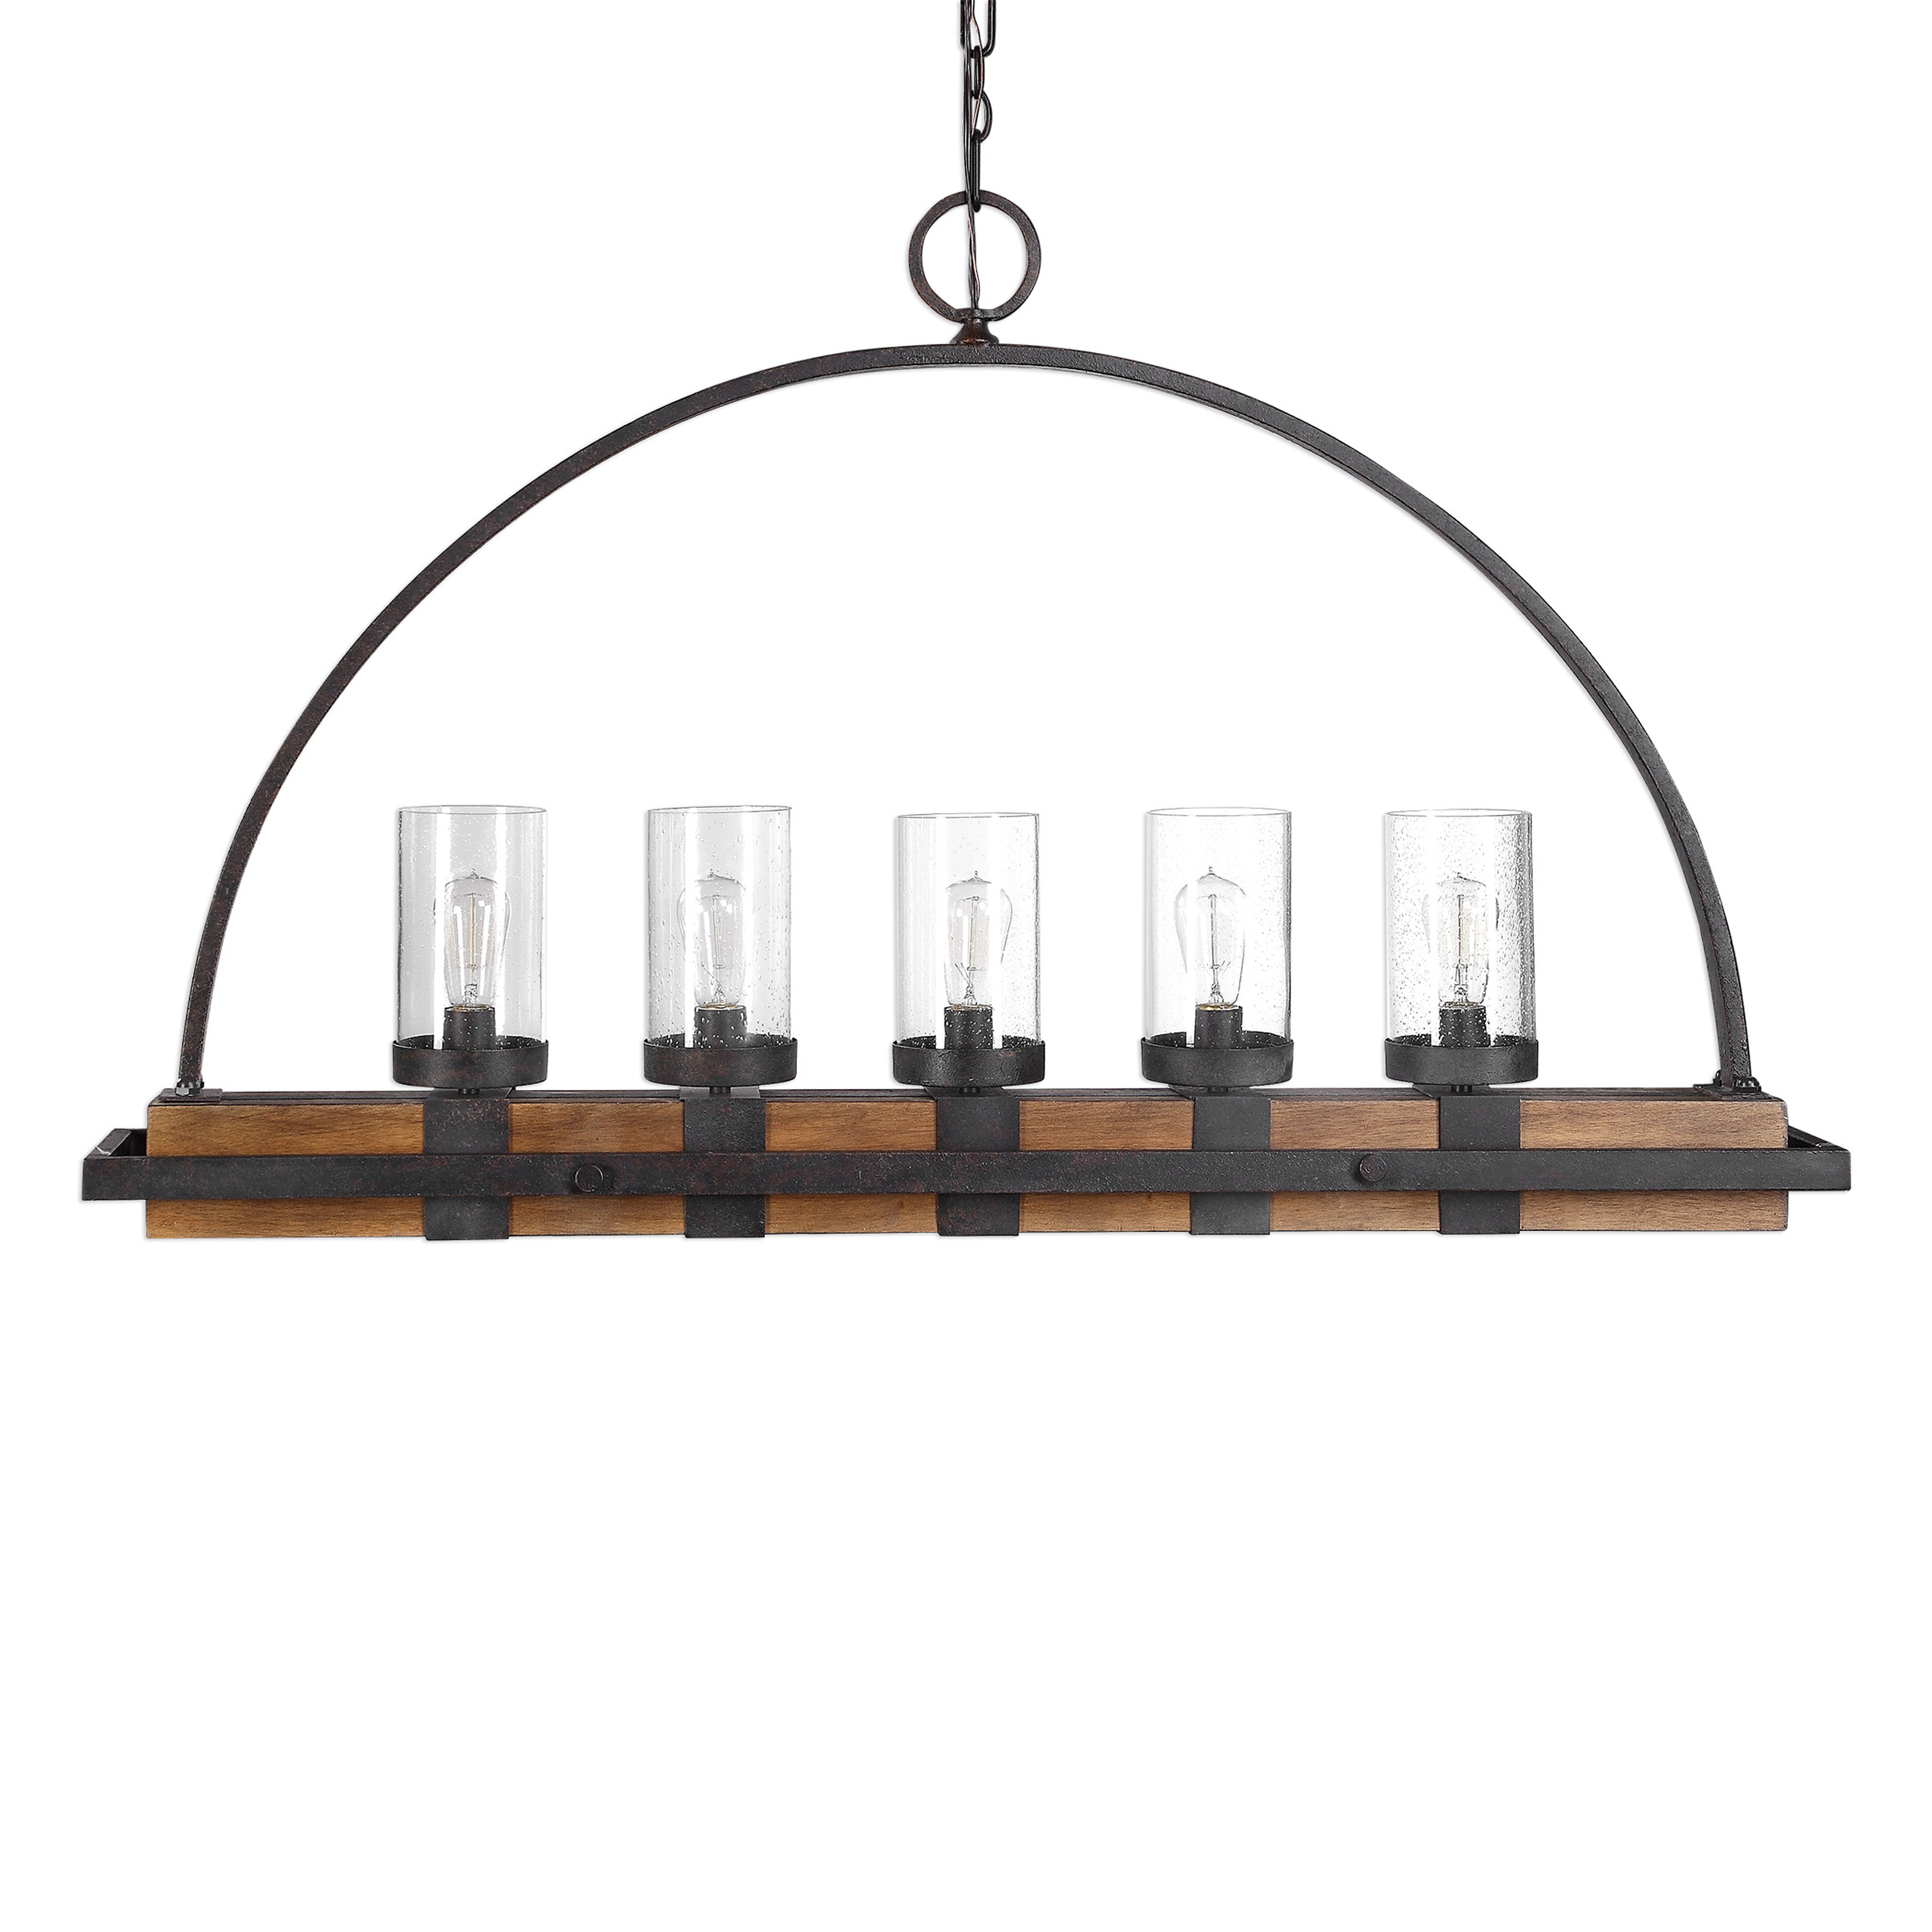 Atwood Rustic Linear Chandelier, 5 Light - Hudsonhill Foundry